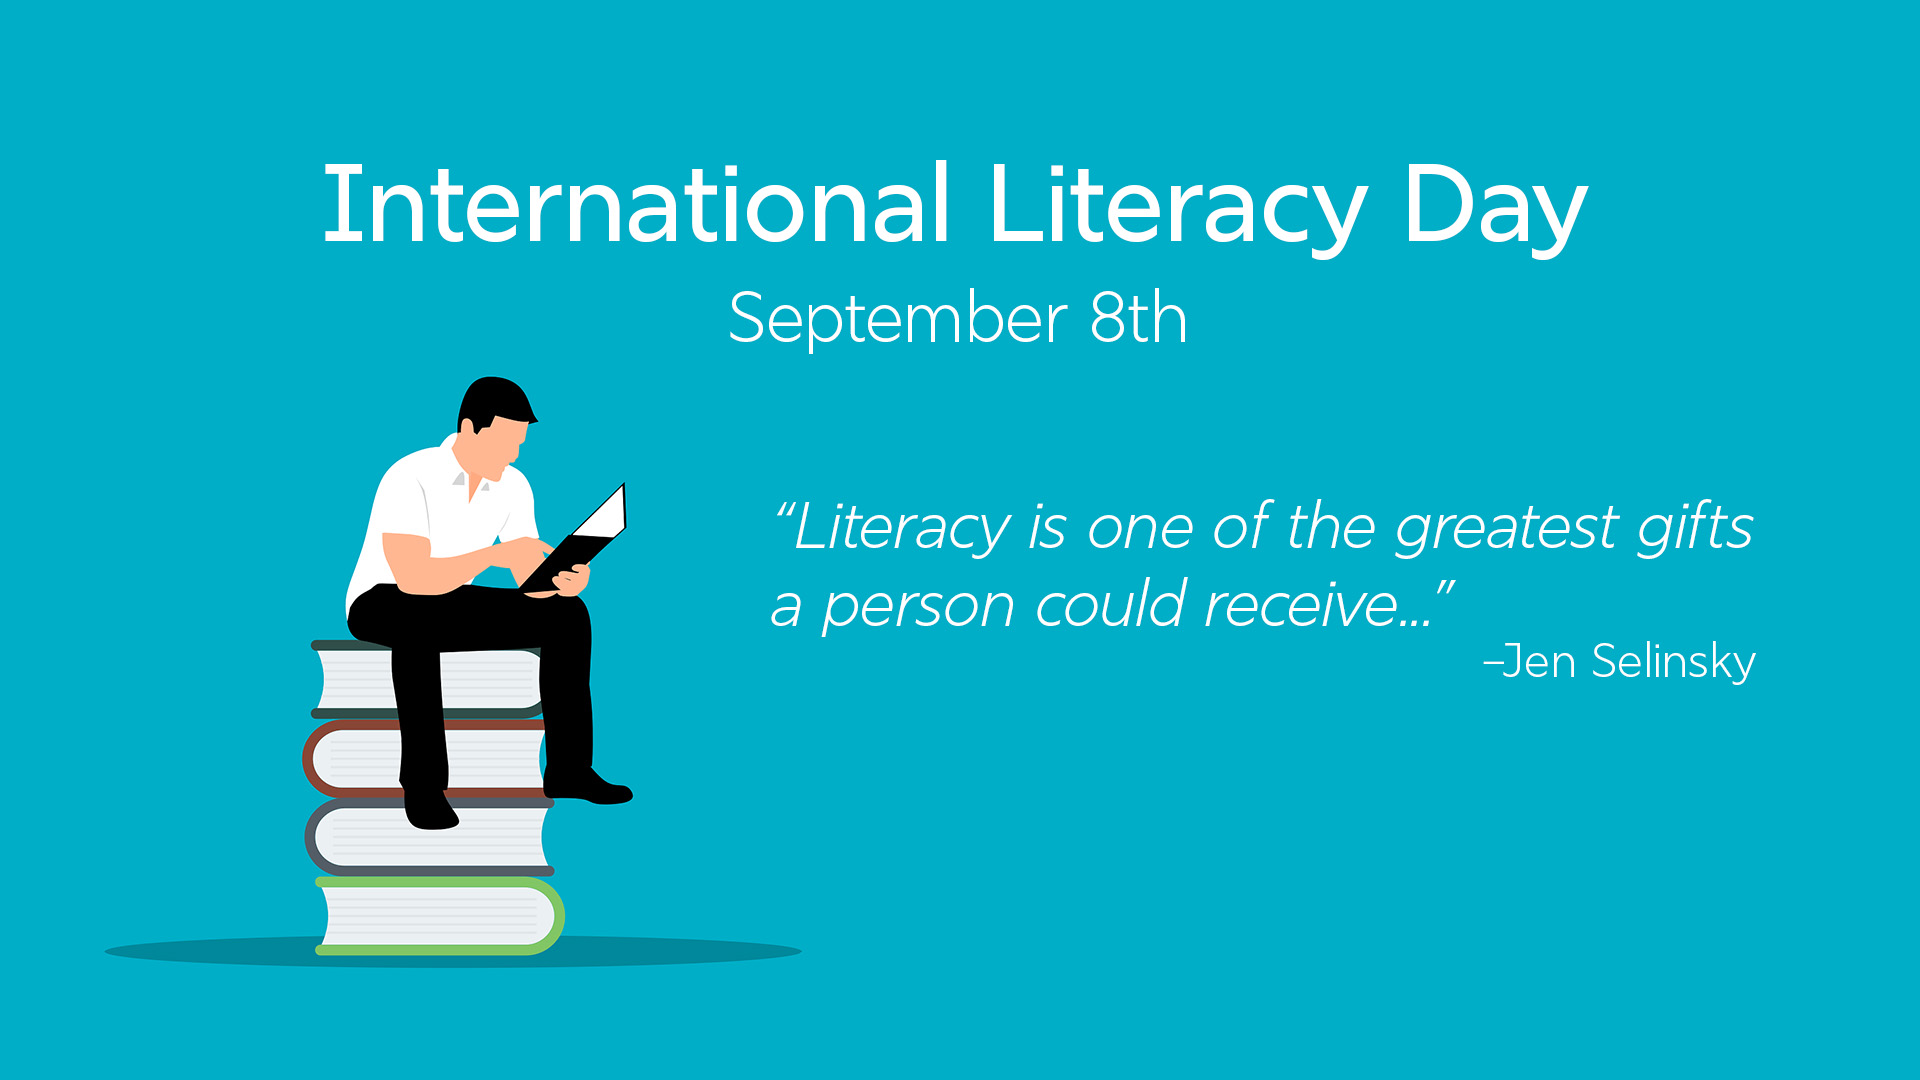 Teal blue background. White serif font letters at the top center read International Literacy Day September 8th. The the left smaller white italic letters in a serif font read "Literacy is one of the greatest gifts a person could receive..." –Jen Selinsky. On the left a man sits on top of four large books. The person is wearing black pants and shoes, a white shirt, has black hair, and is reading a black book.